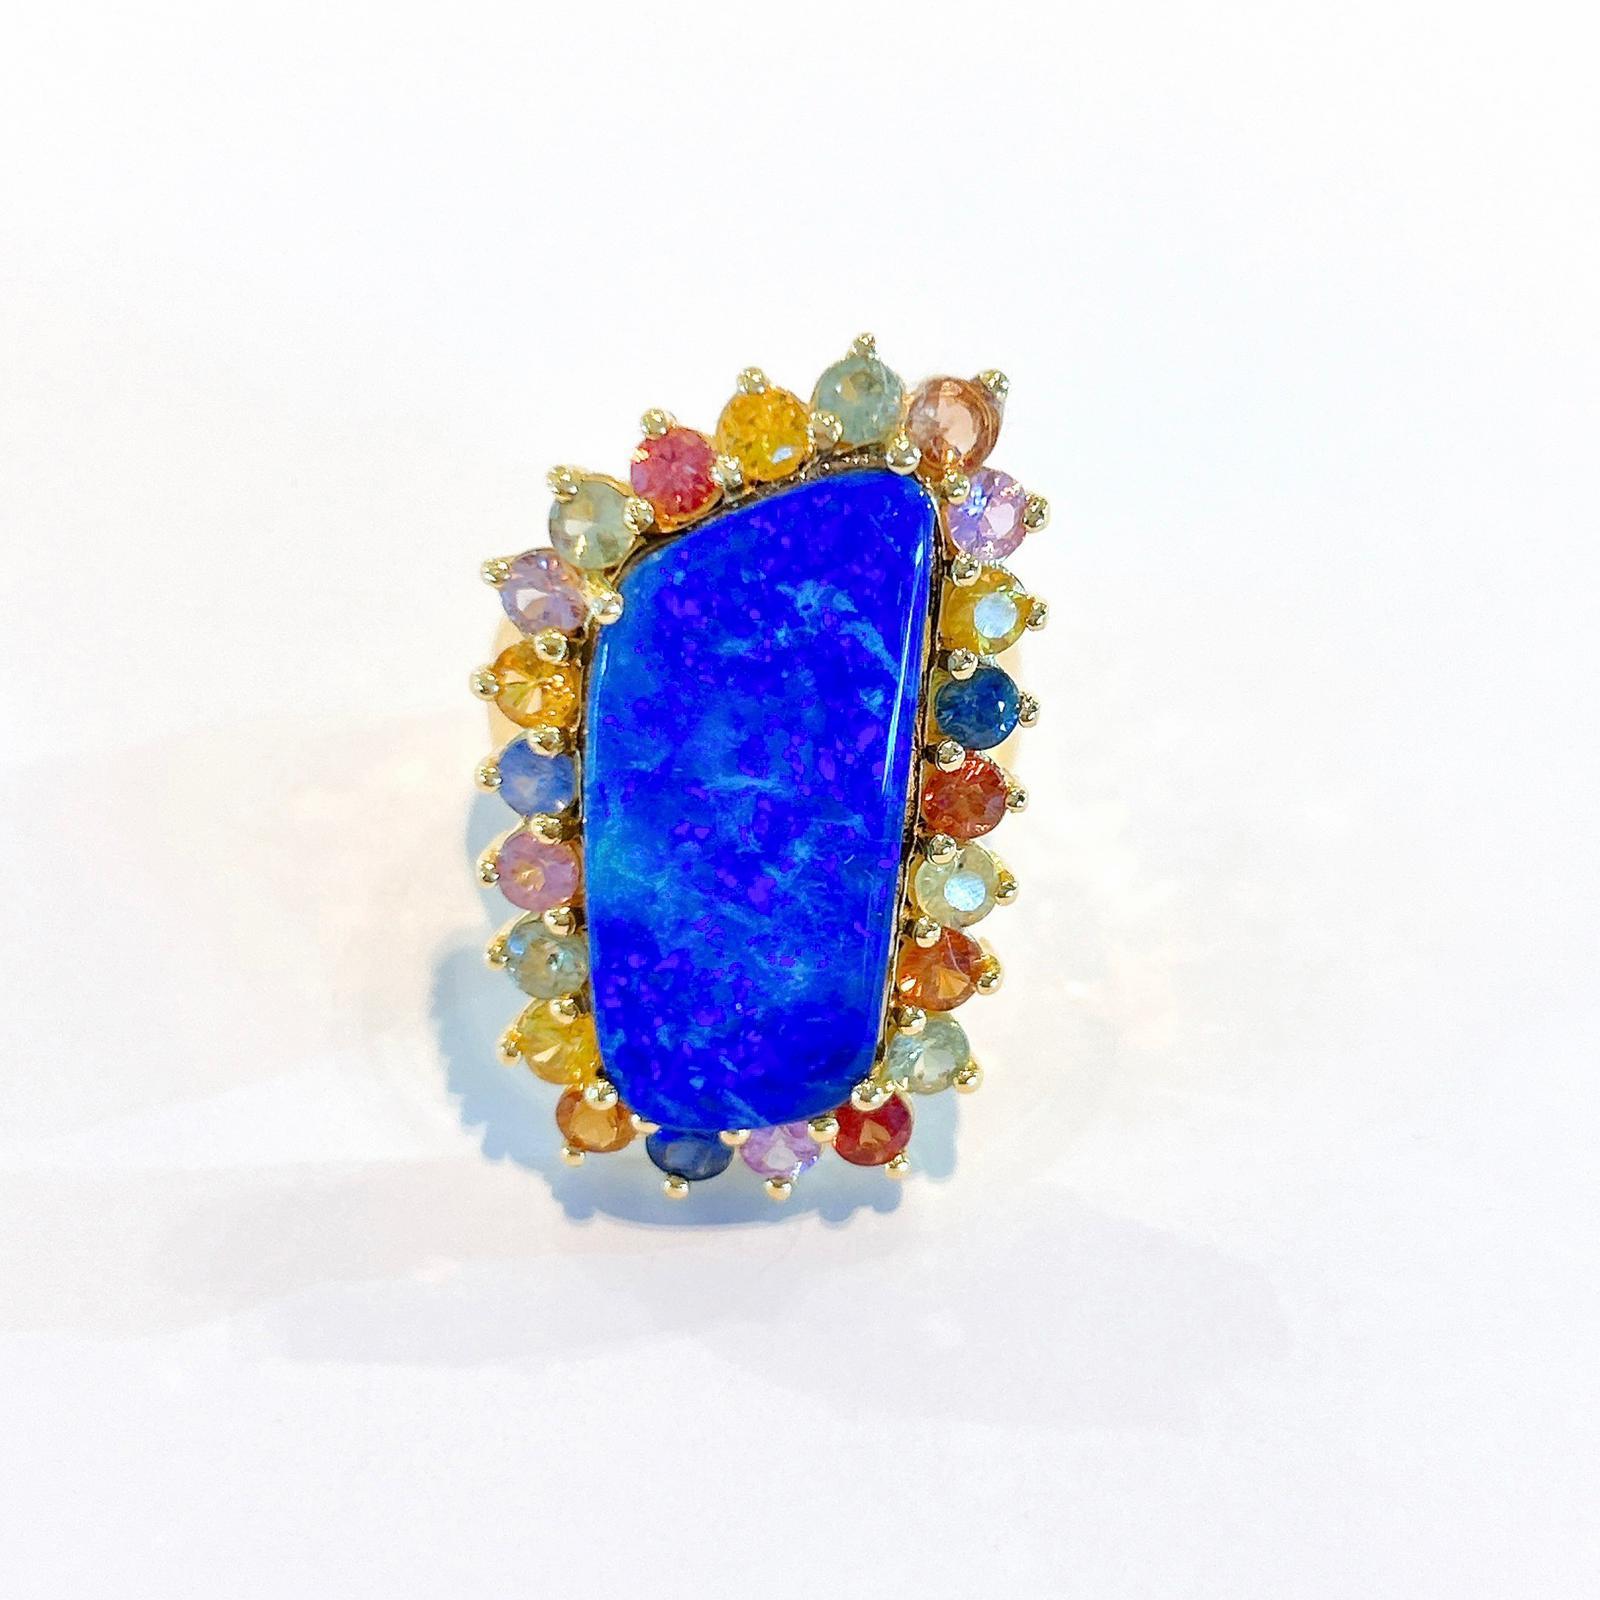 Bochic “Capri” Blue Opal & Multi Color Sapphire Cocktail Ring Set In 22K Gold & Silver 
Multi natural gem Ring 
Beautiful Natural Blue Opal - 29 carats
Natural Multi Color Sapphires from Sri Lanka - 6 carats 
Round and oval brilliant shapes 
This